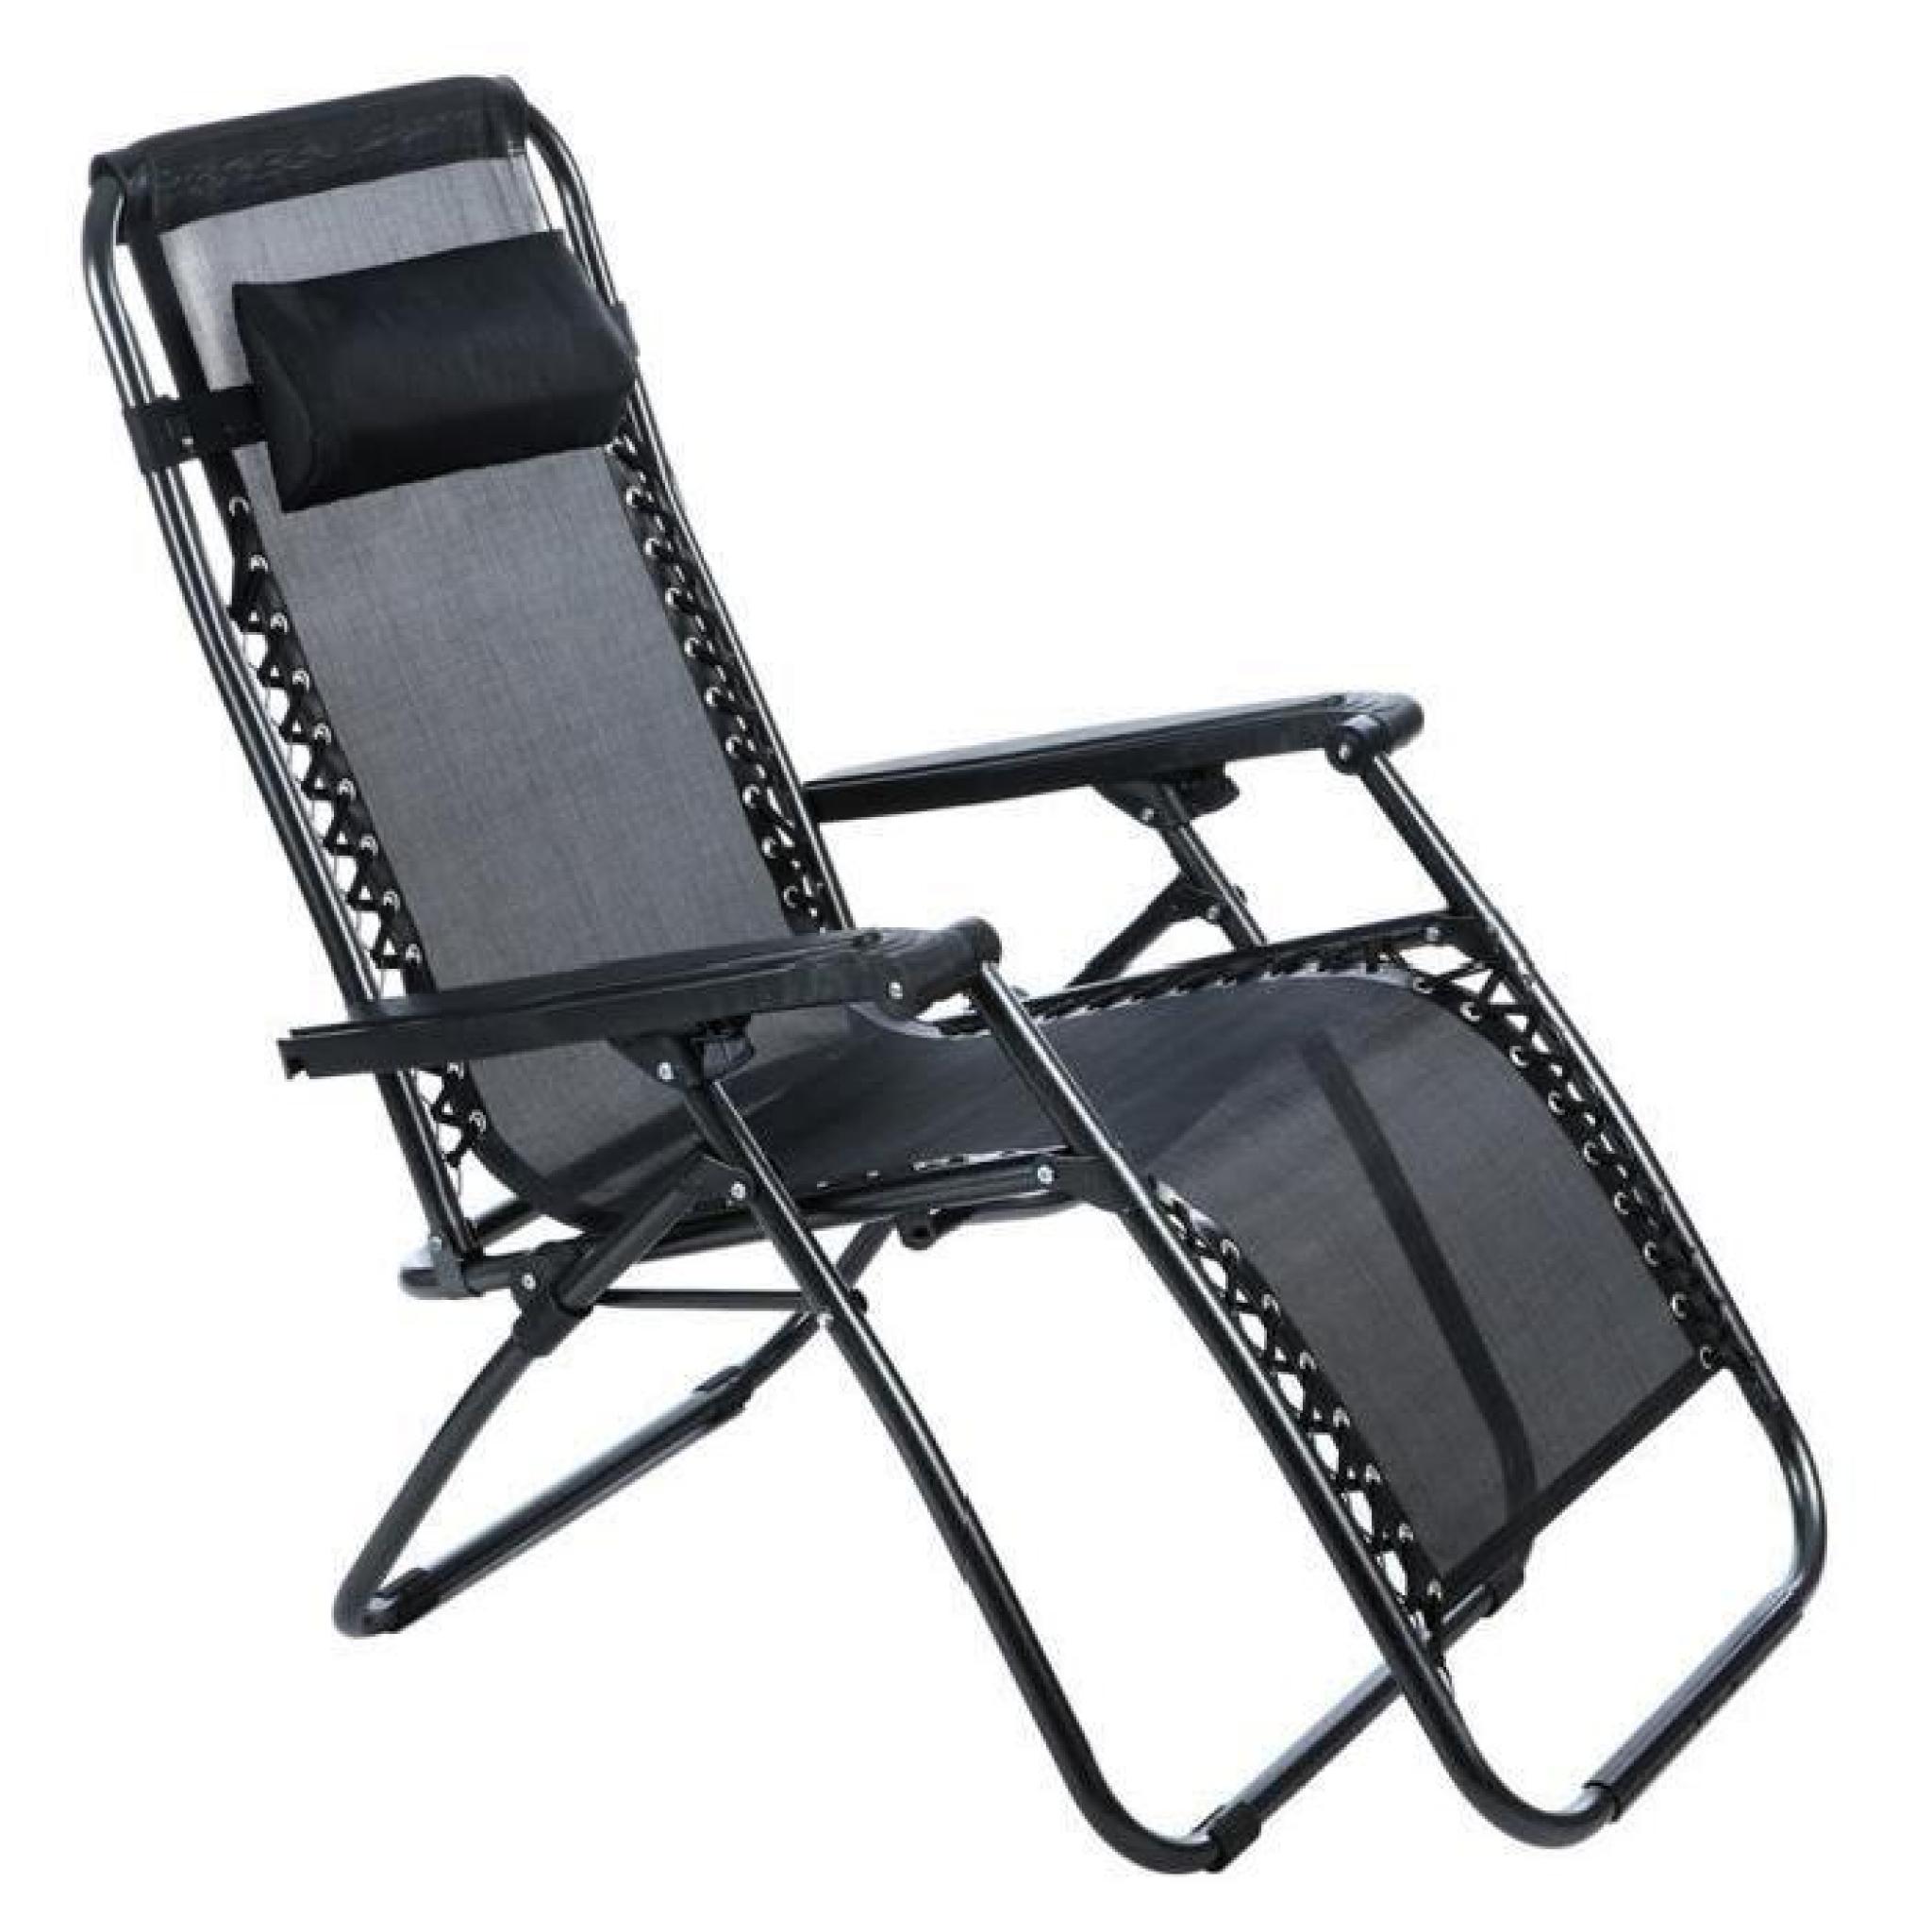 Chaise inclinable salon Jardin plage Camping chaise extérieure